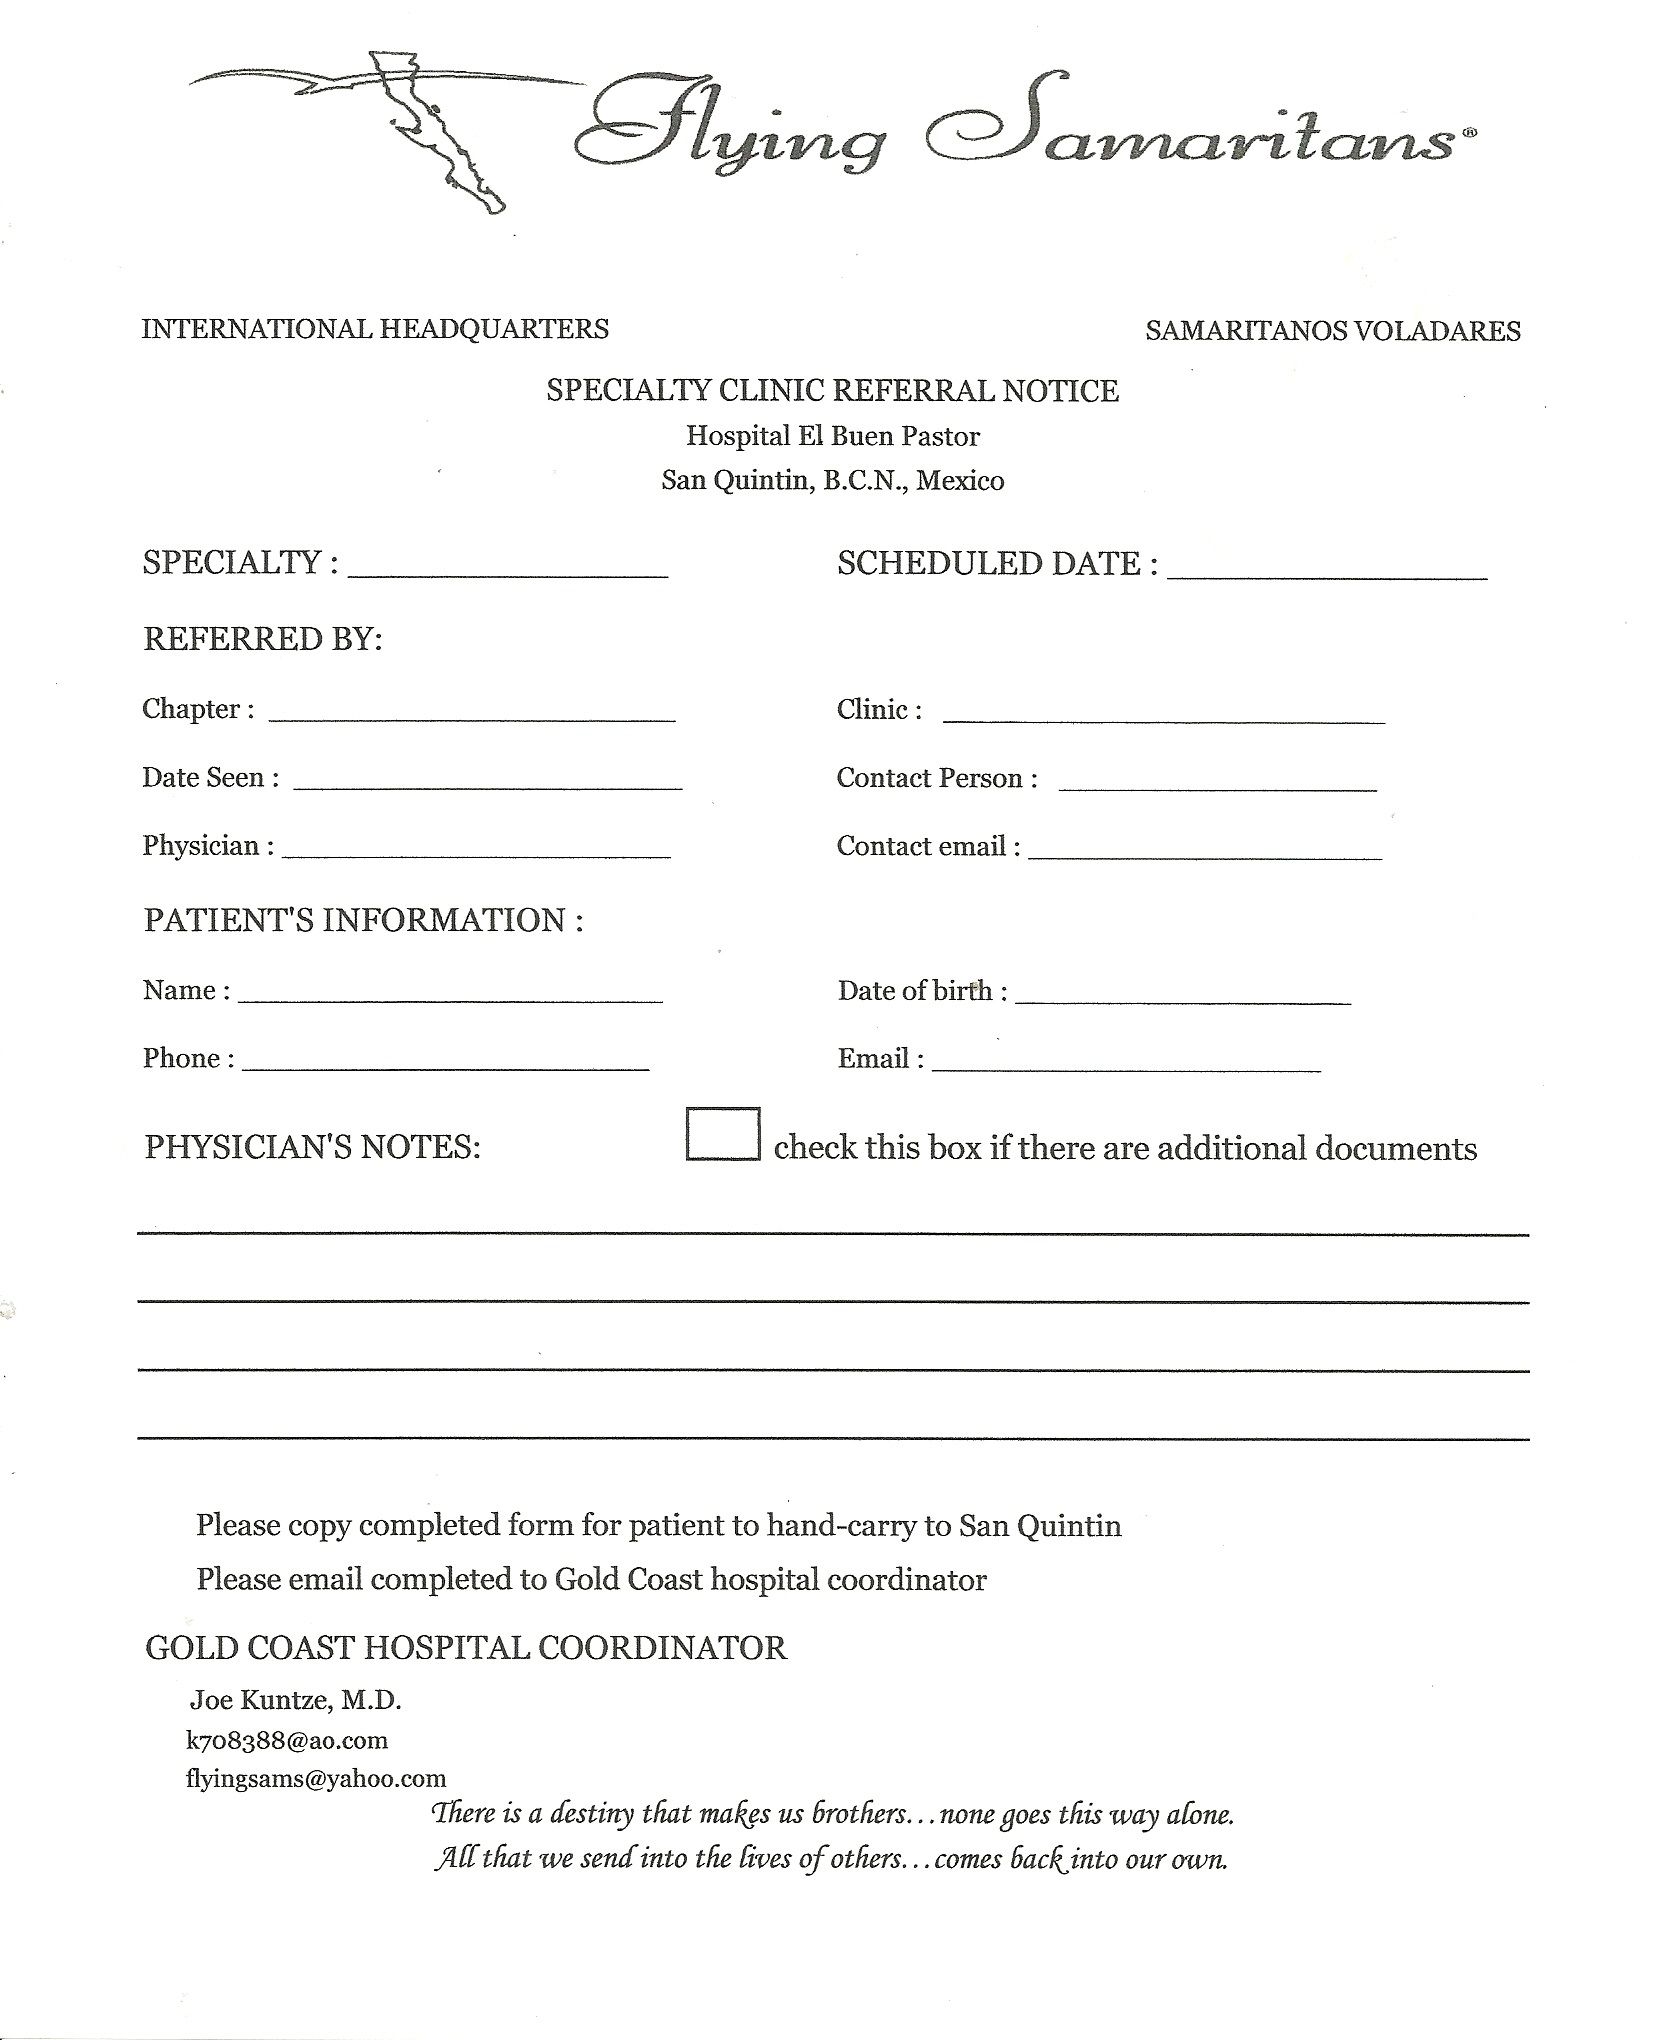 Specialty Clinic Referral Form 3353